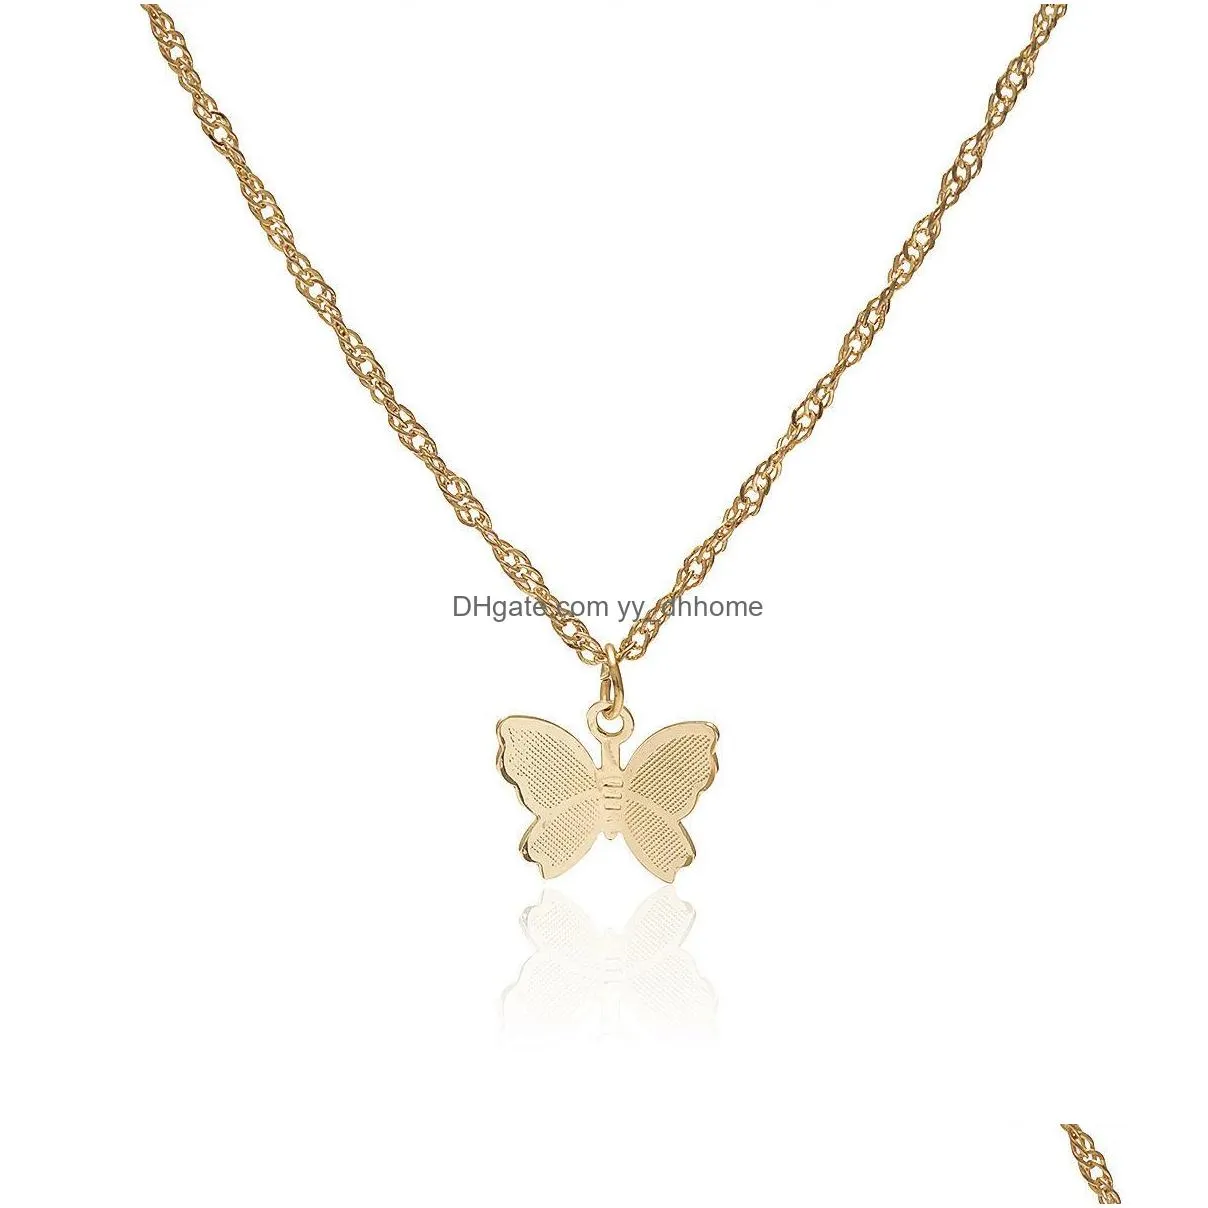 butterfly necklace earrings women earings gold chains necklace girls chokers womens pendant necklaces fashion jewelry gift 